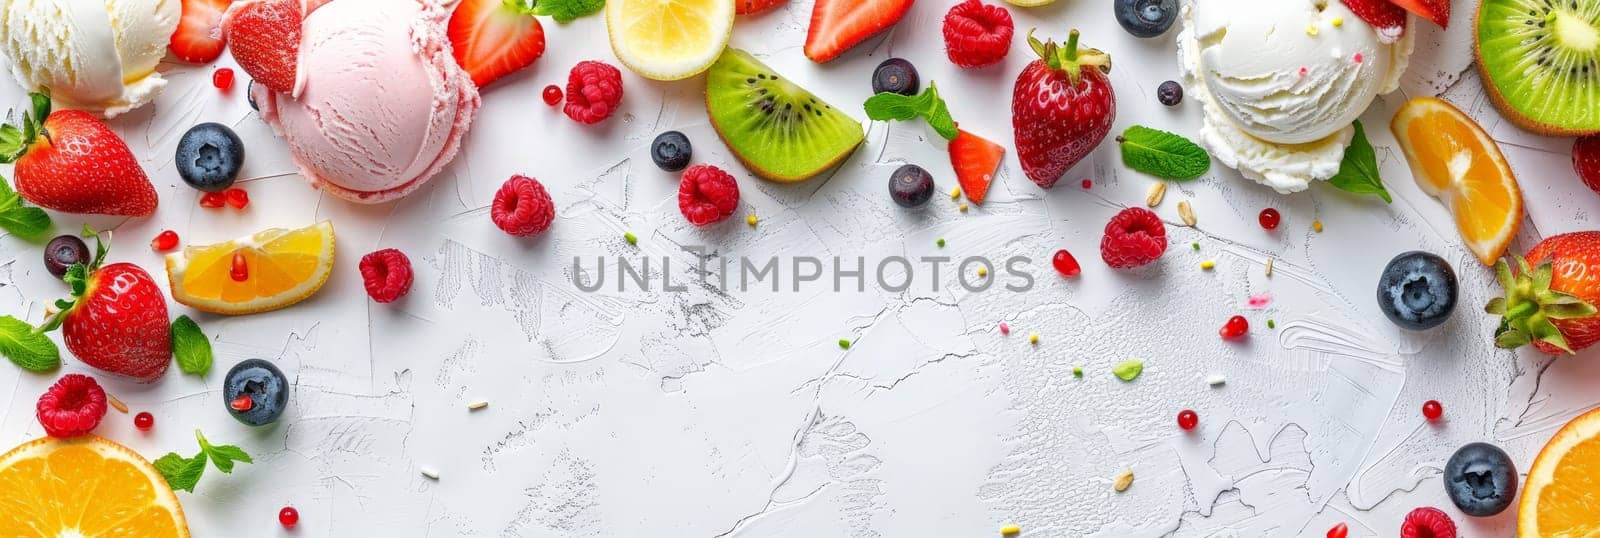 A white background with a variety of fruits and ice cream. The fruits include strawberries, blueberries, raspberries, and oranges